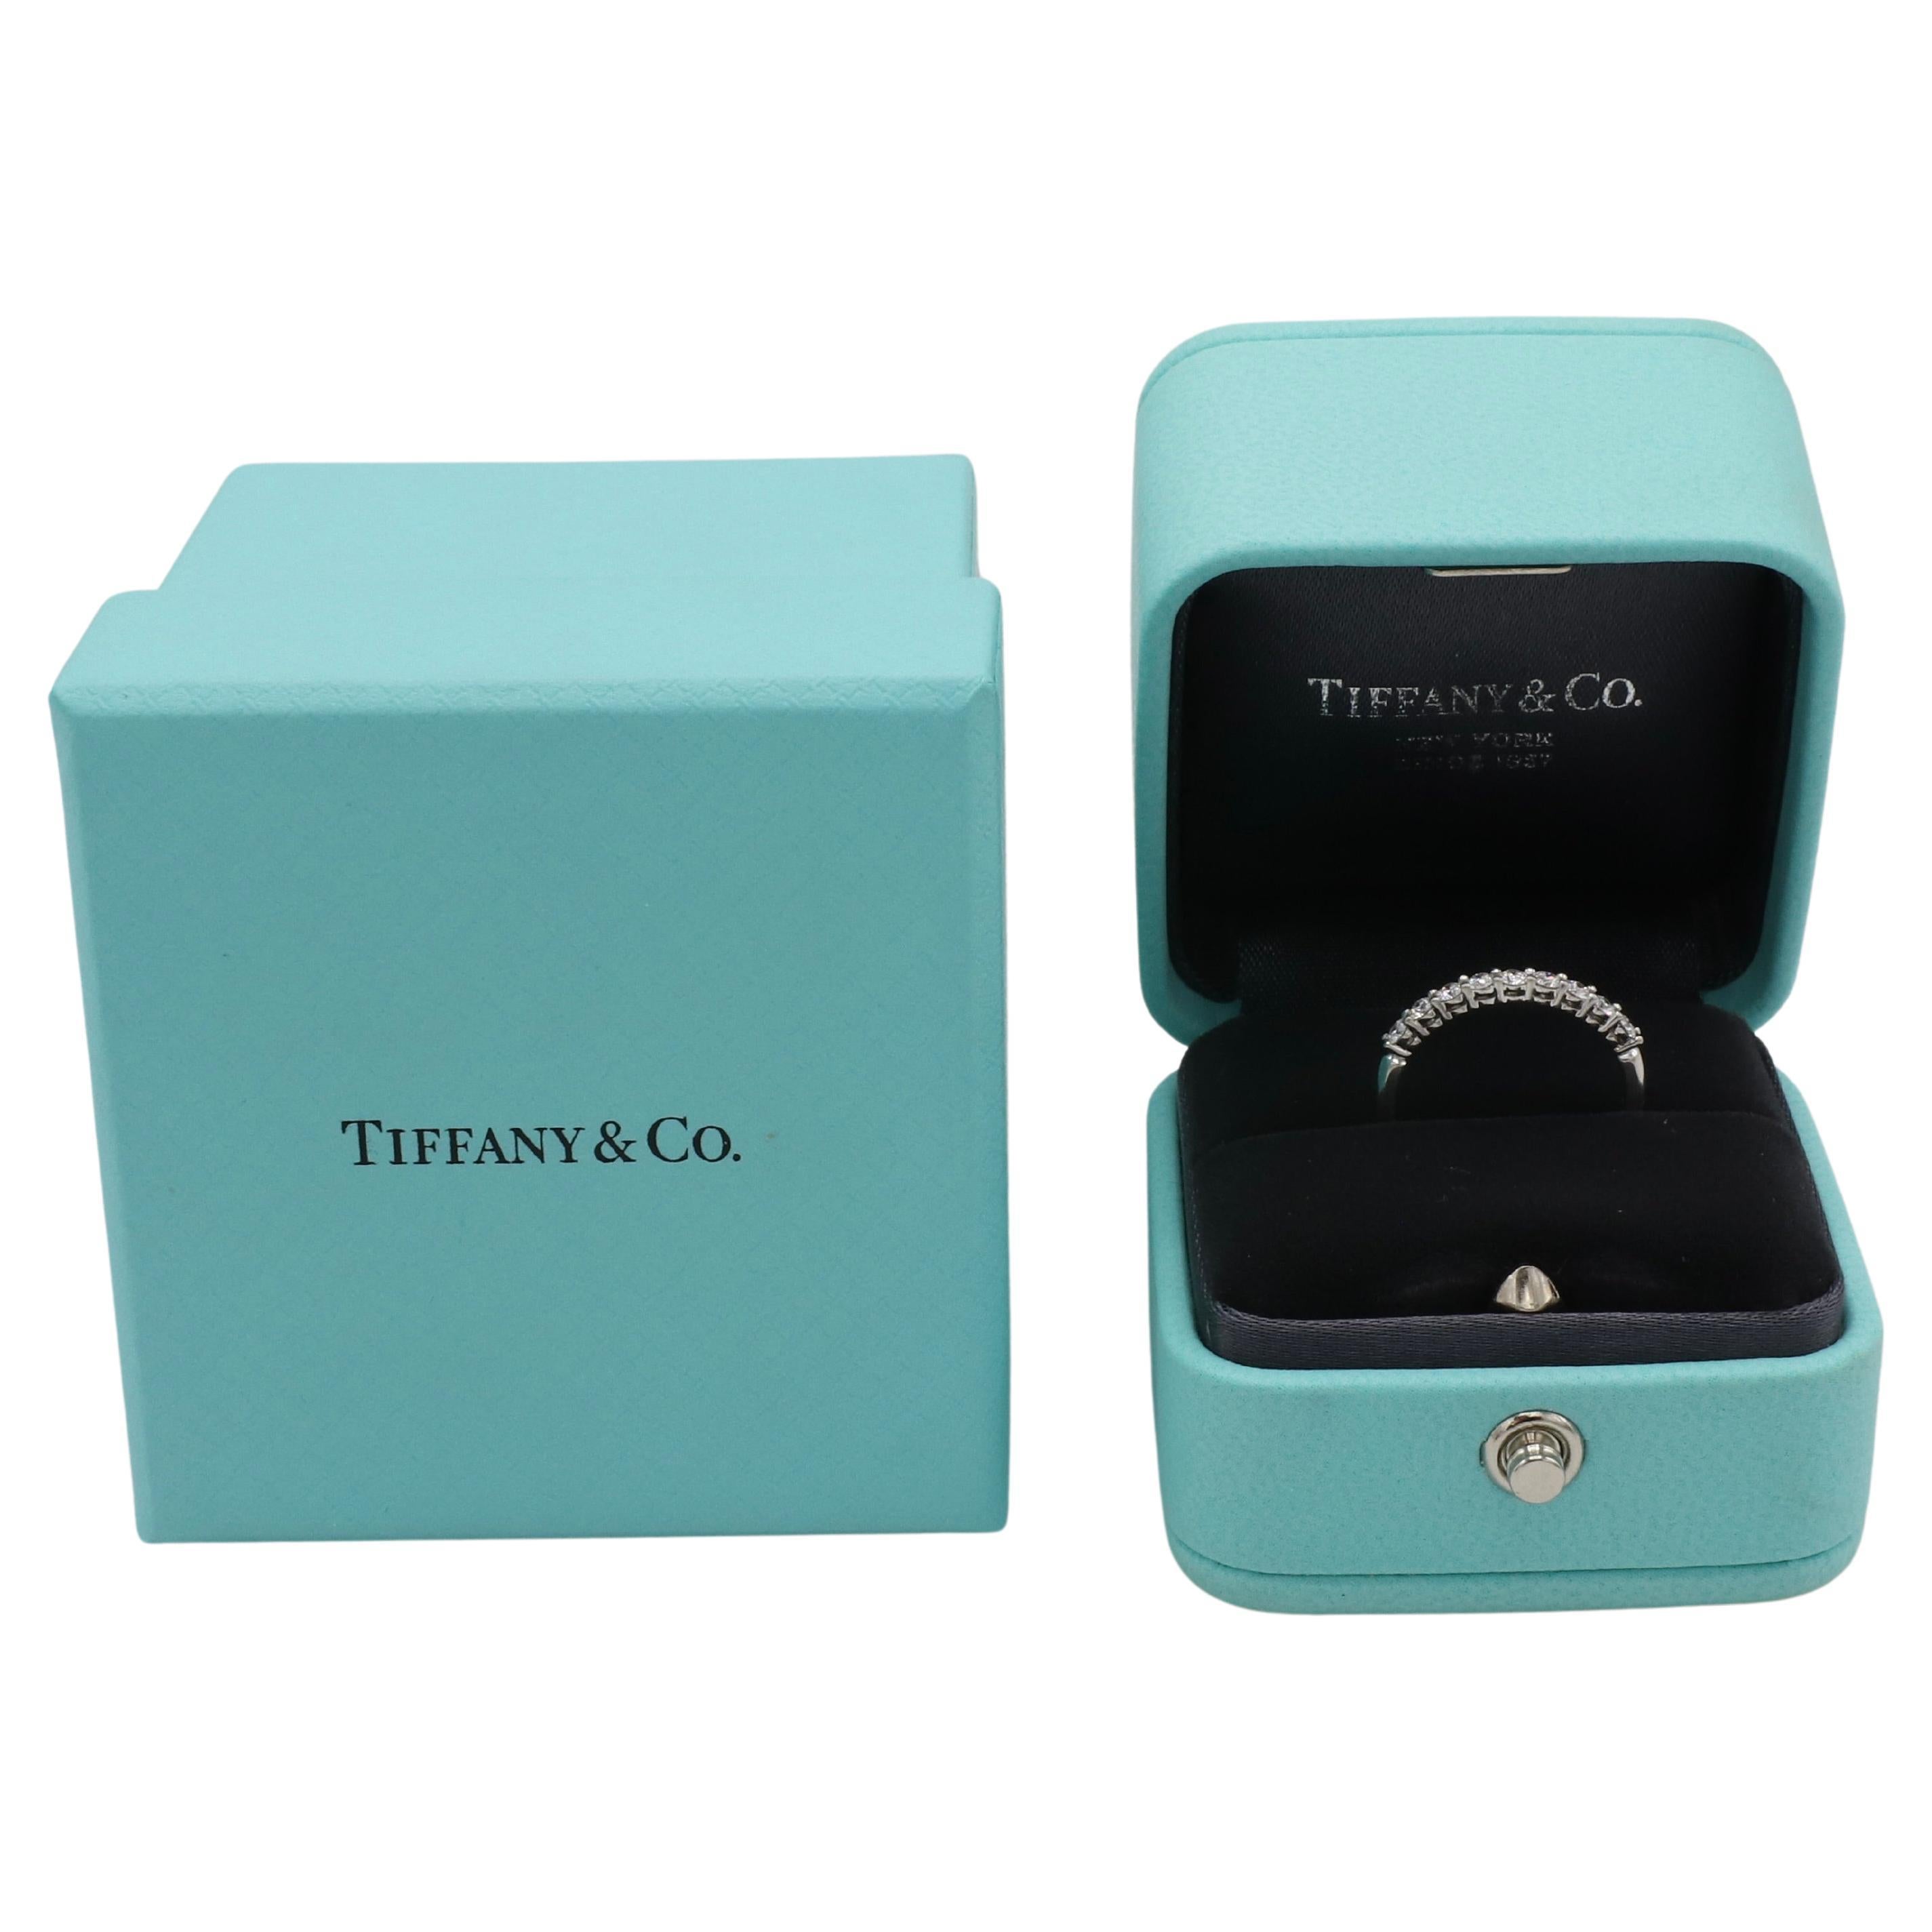 Tiffany & Co. Forever Platinum Natural Diamond Half Band Ring 
Metal: Platinum
Weight: 2.48 grams
Diamonds: Approx. .27 CTW F-G VS round natural diamonds
Width: 2mm
Size: 5 (US)
Height: 2mm
Signed: ©Tiffany & Co. PT950
Retail: $4,000 USD